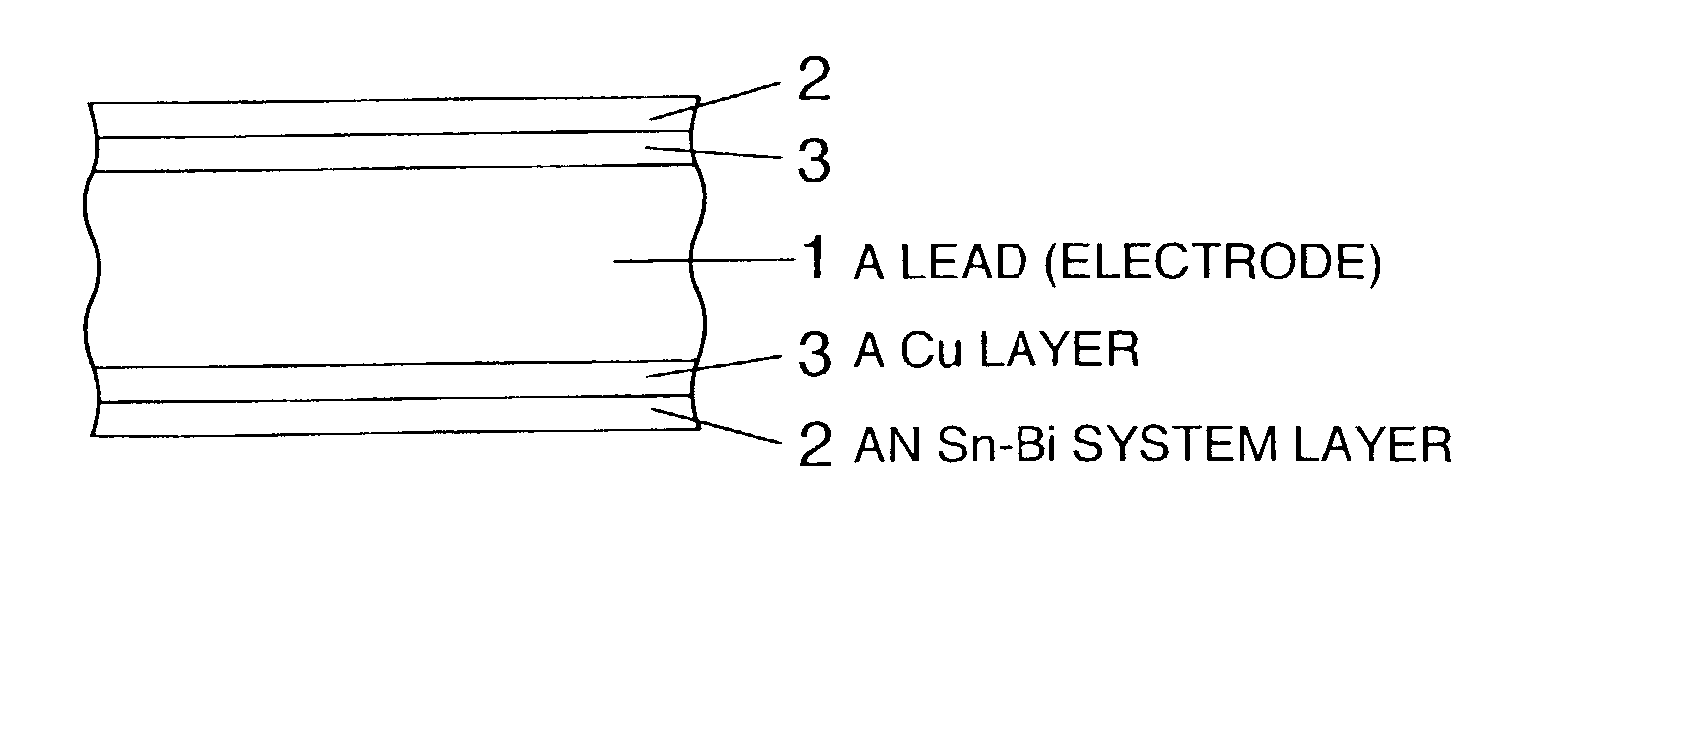 Pb-free solder-connected structure and electronic device